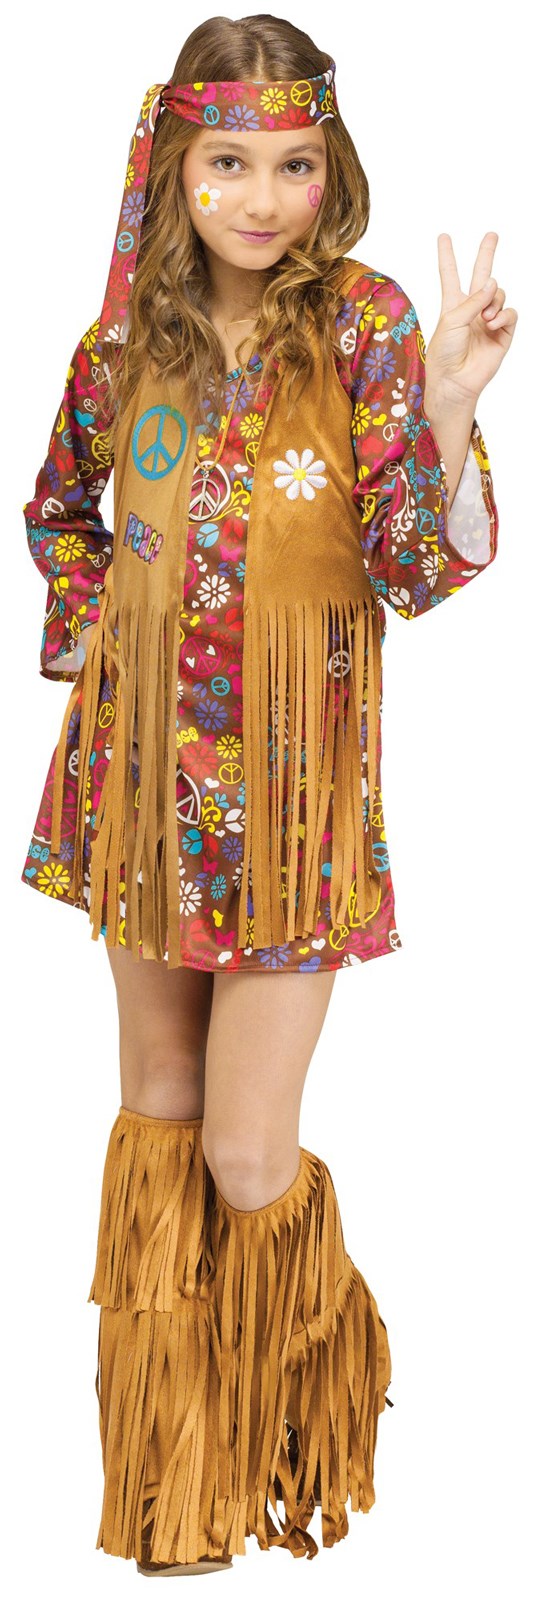 Kids Peace and Love Hippie Costume